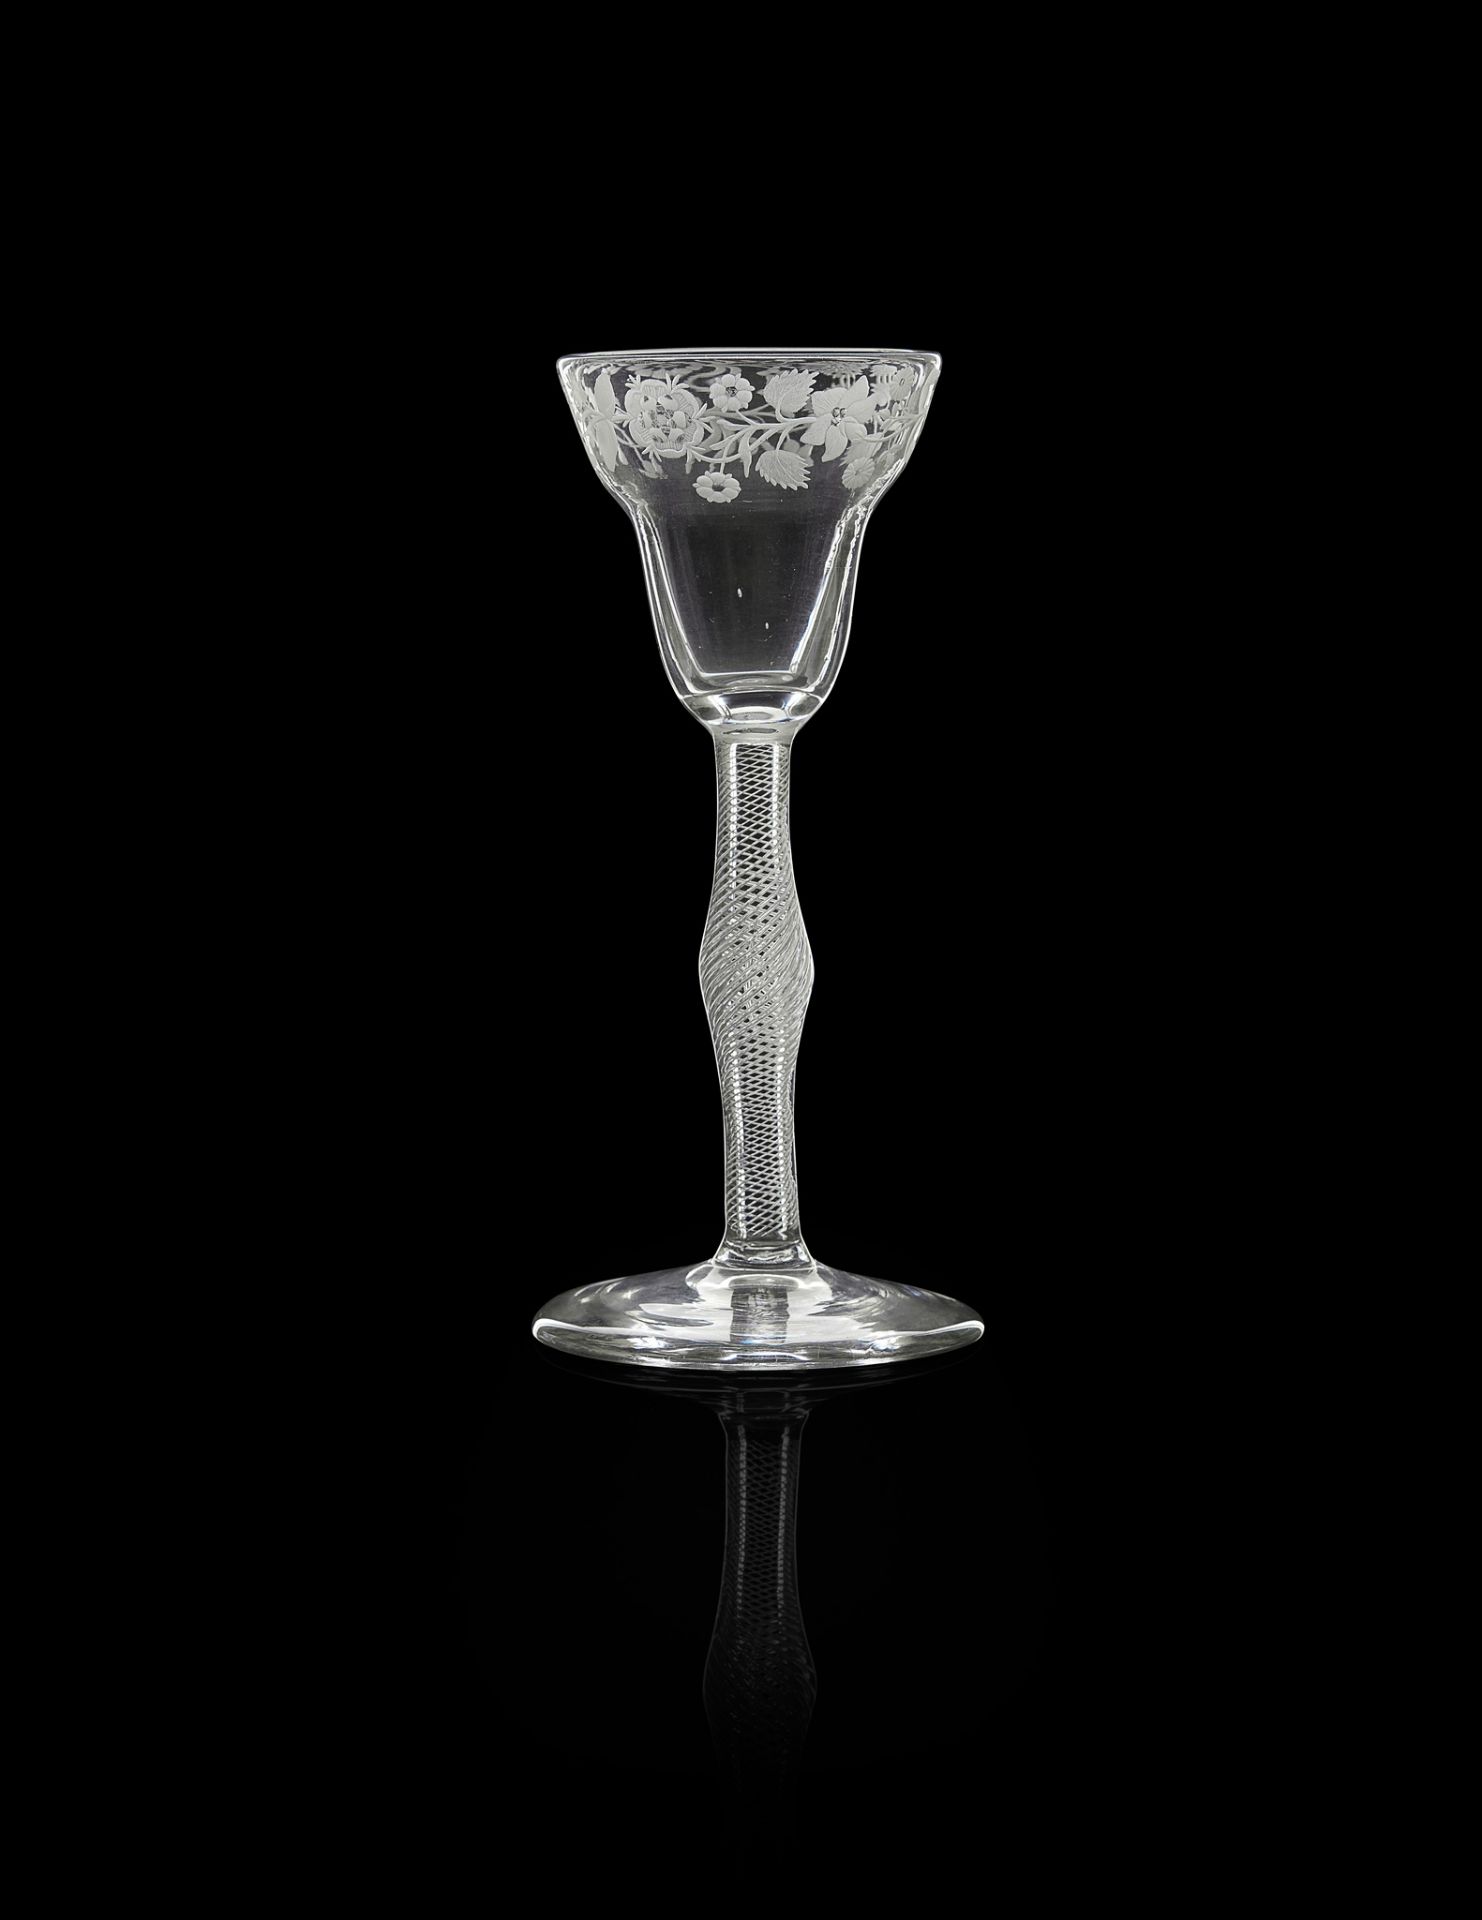 A JACOBITE WINE GLASS LATE 18TH CENTURY